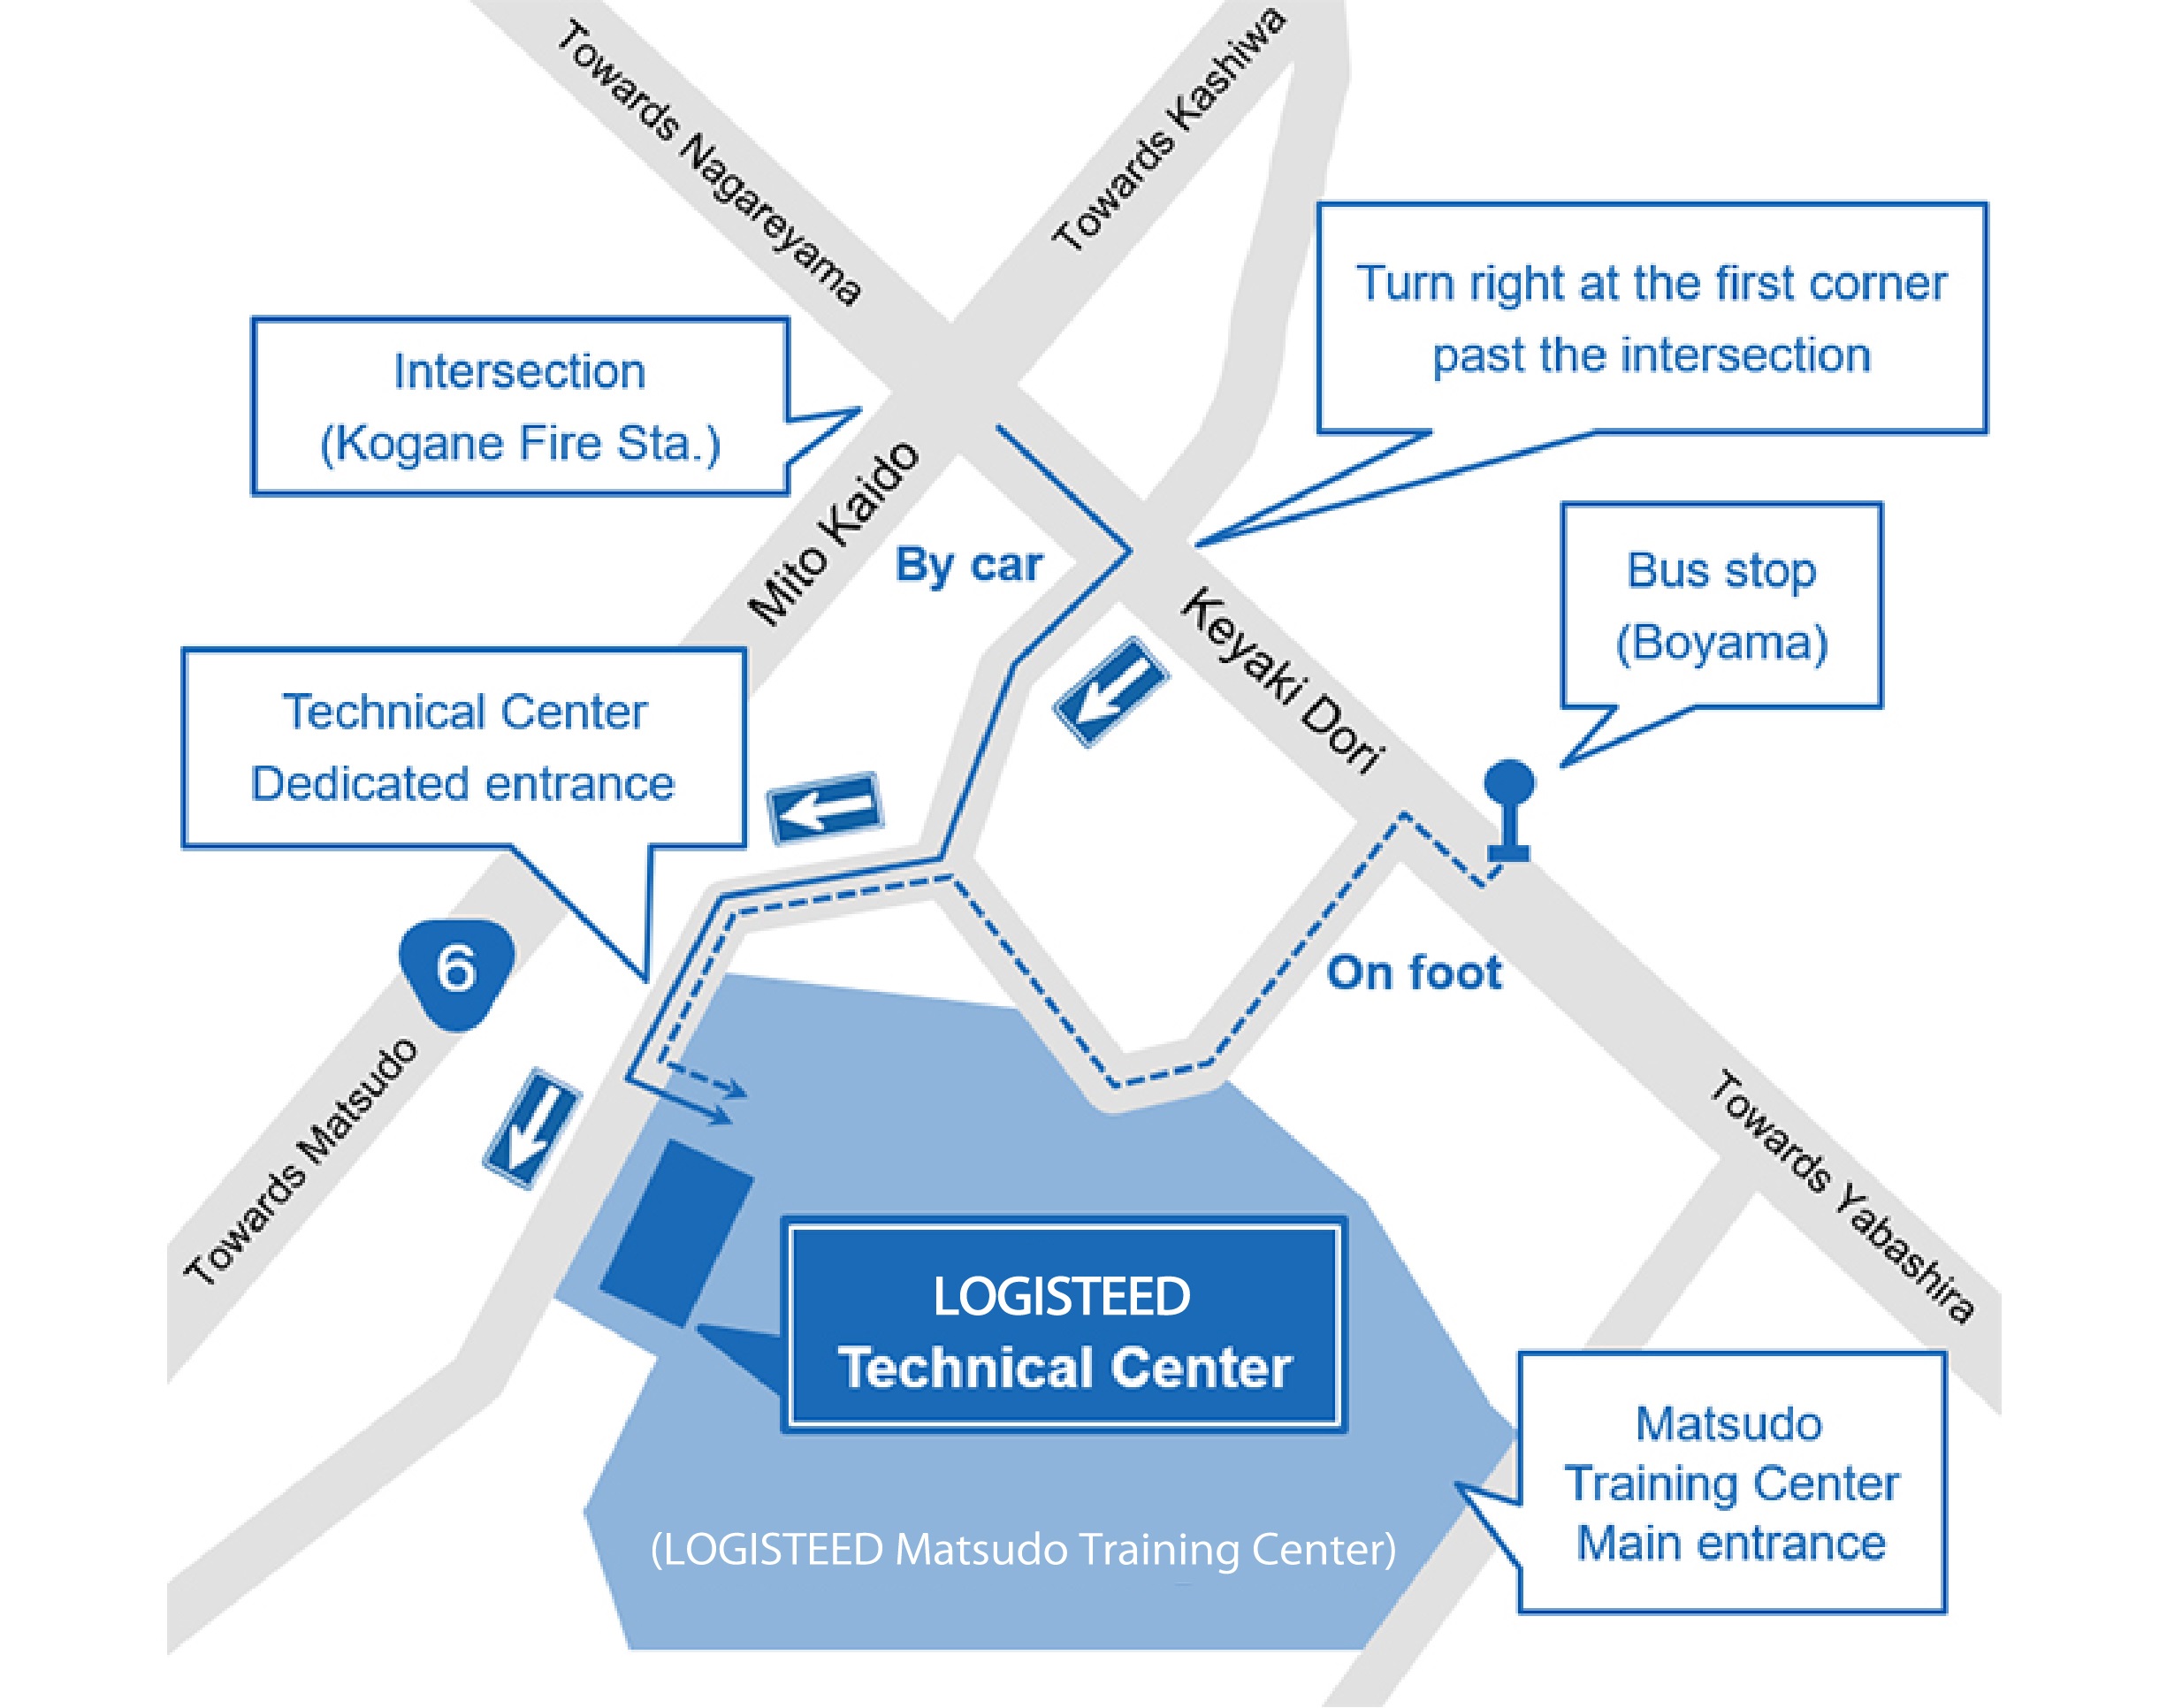 Location of Technical Center